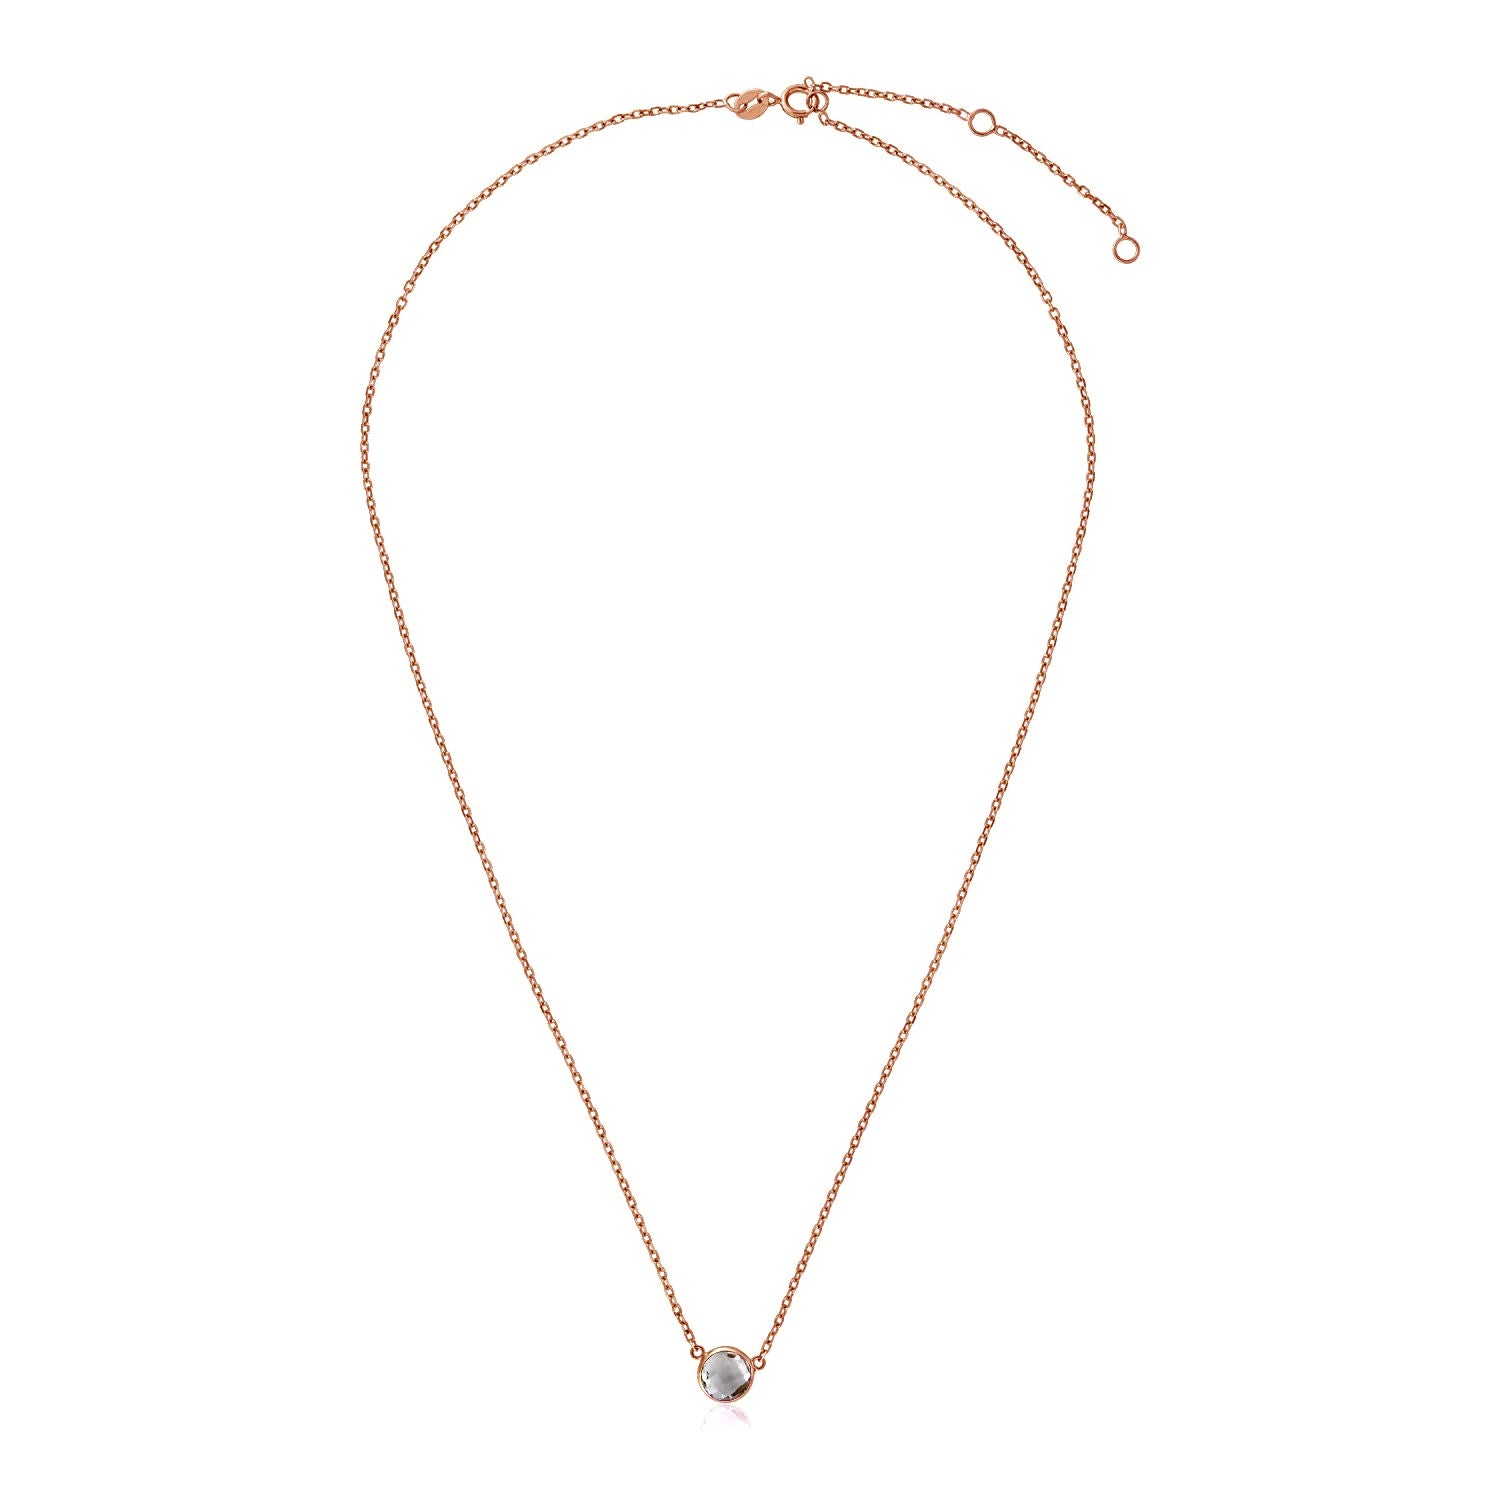 14K Rose Gold 17 Inch Necklace With Round White Topaz 93658-1